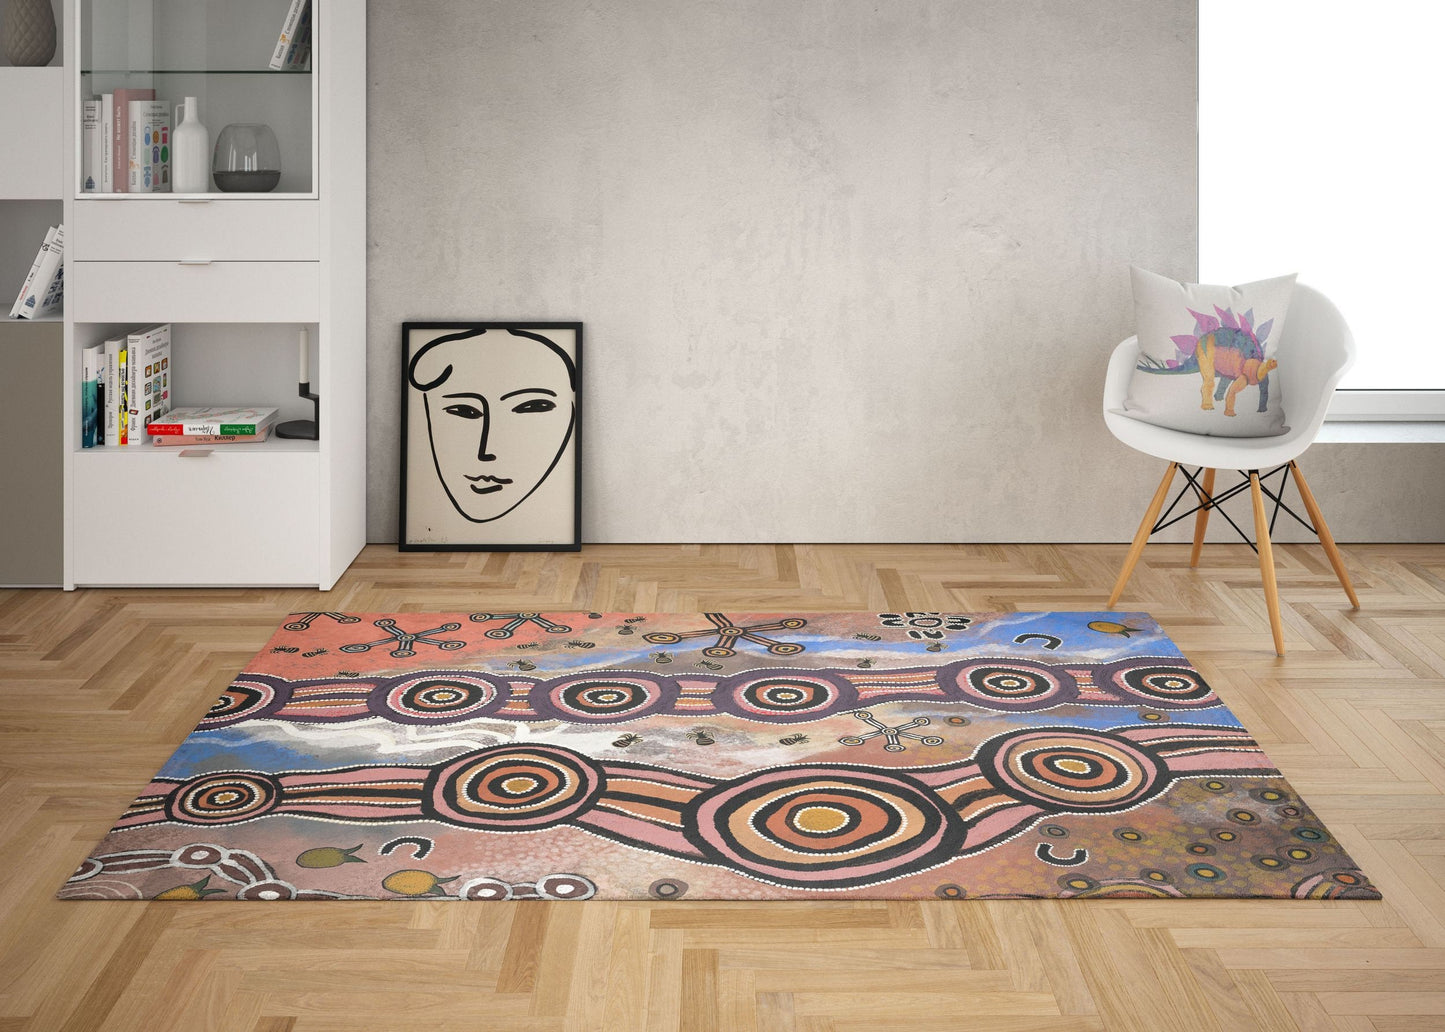 Large Area Rugs, Thick Carpet, Rectangle Rug, Error, Austrialian Aboriginal Rug, Modern Area Rug, Rugs For Living Room, Made In USA